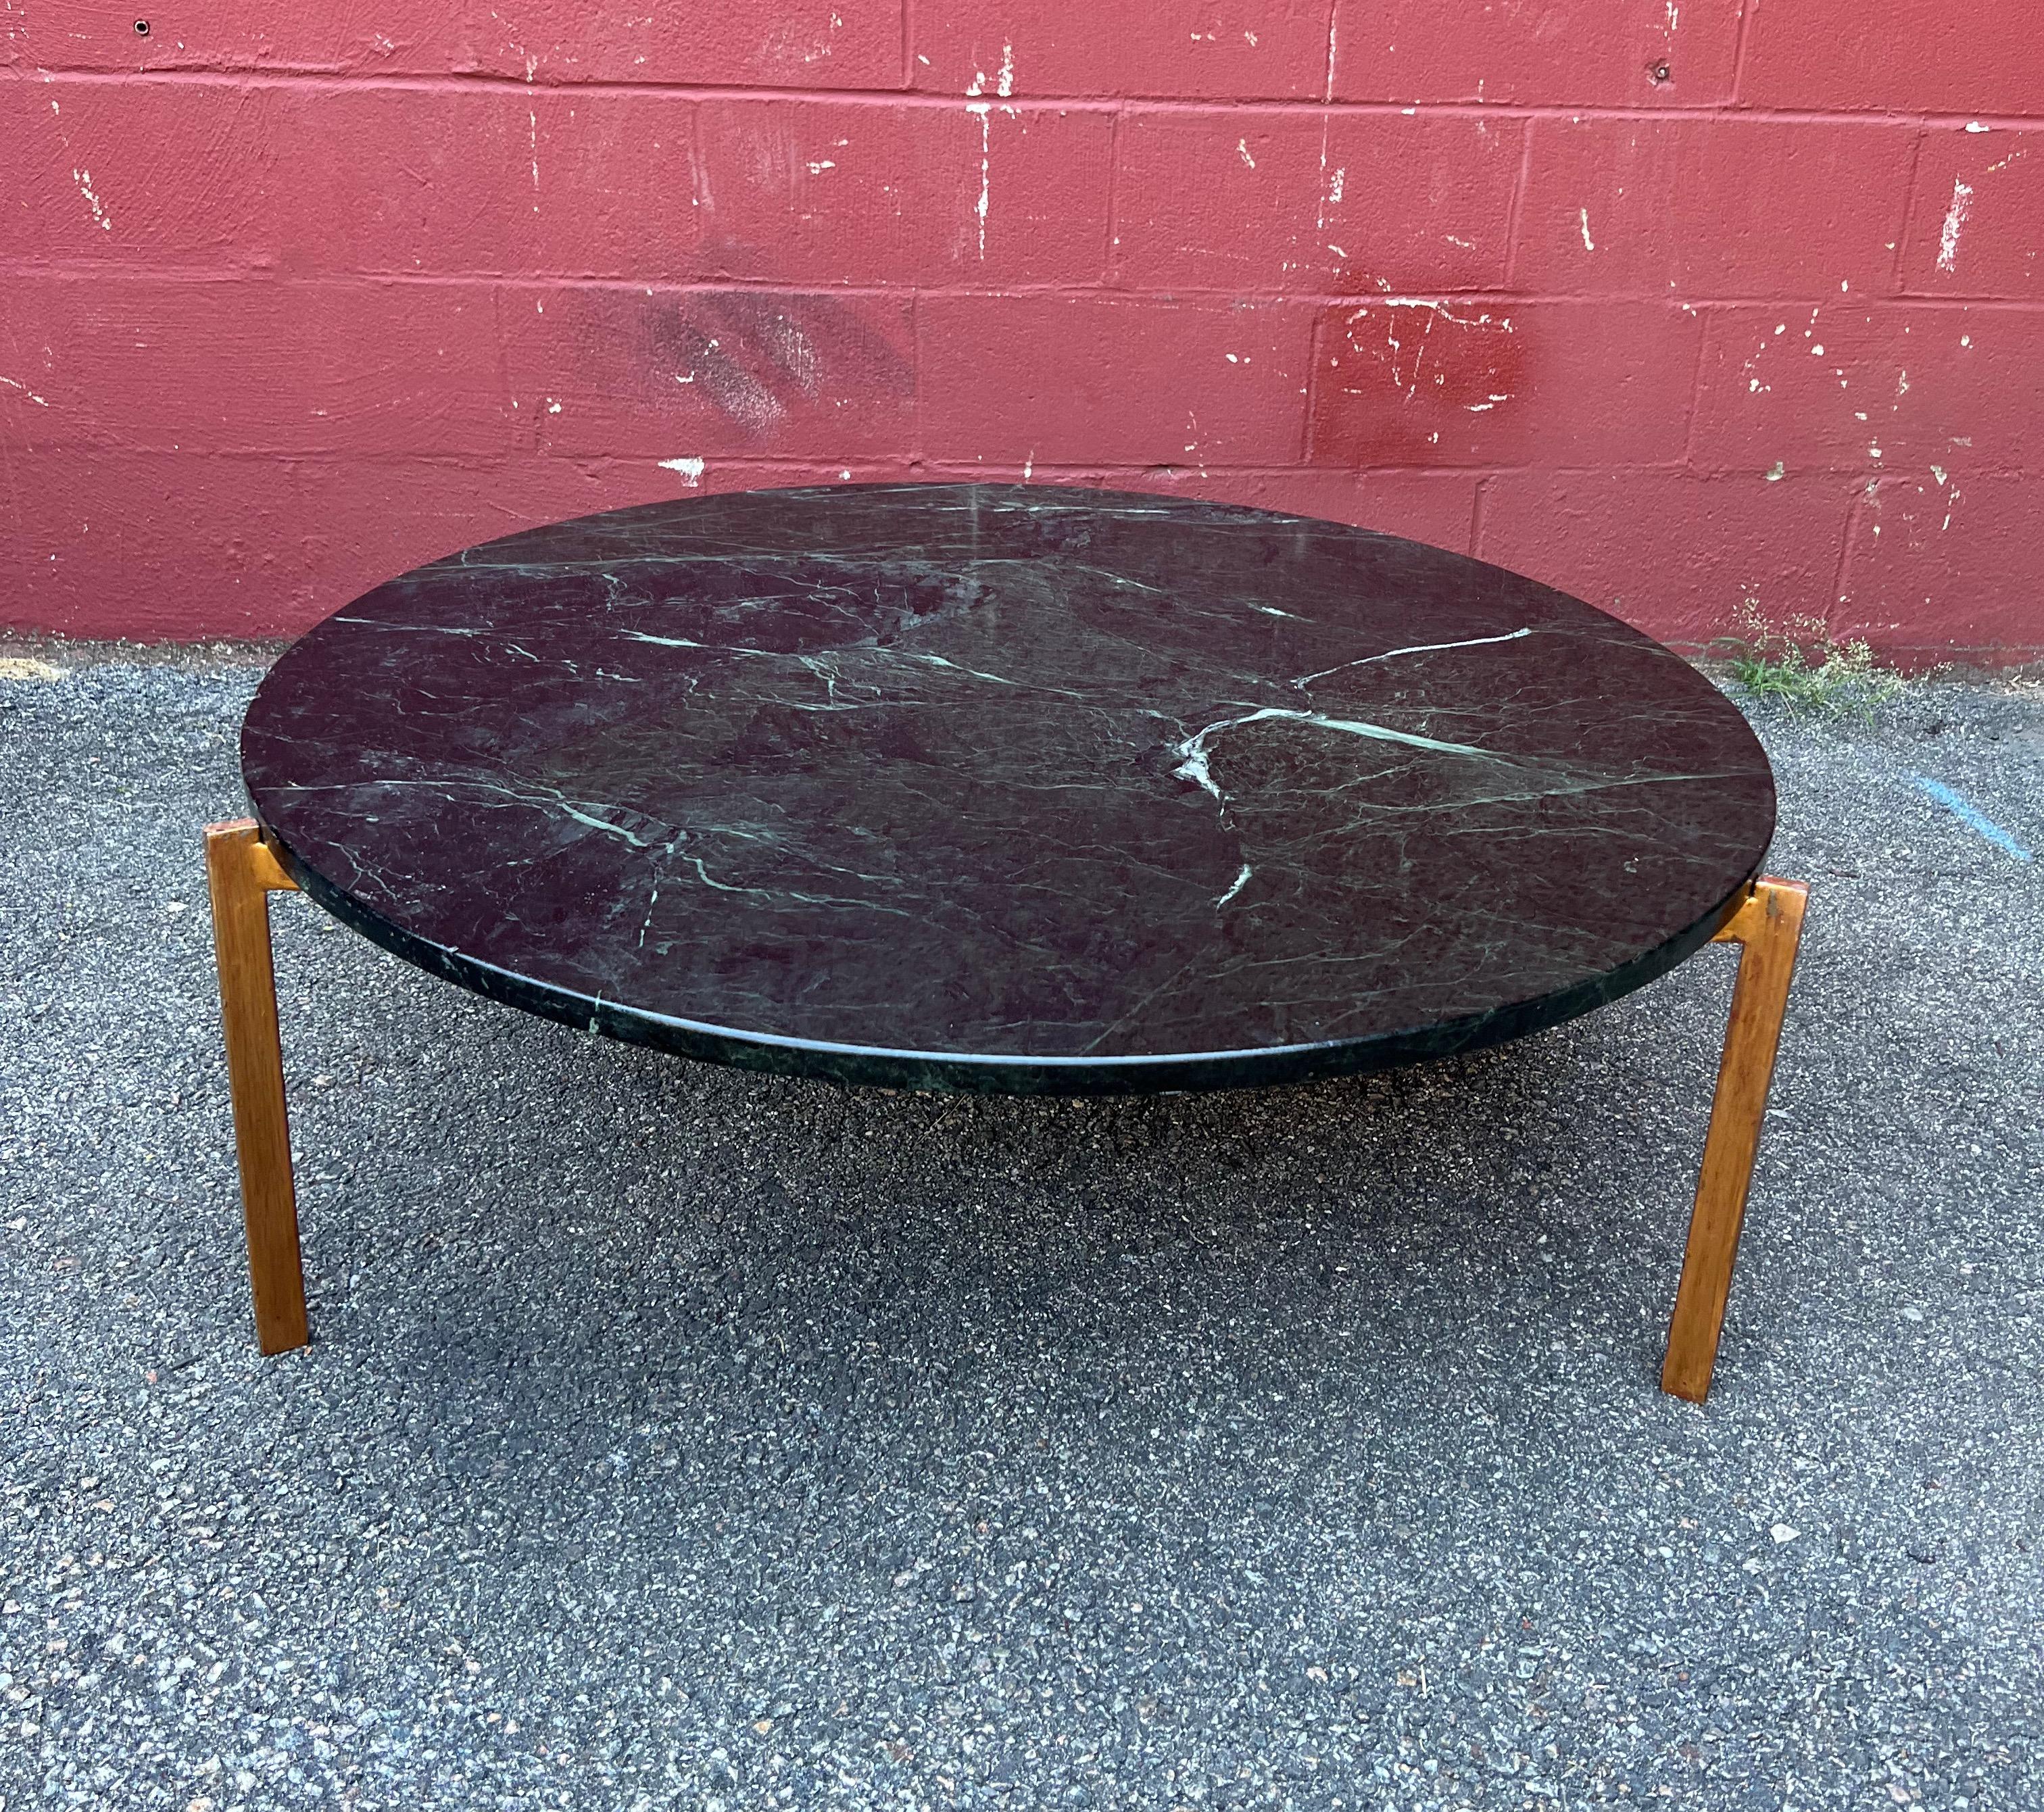 A very chic Mid-Century Modern coffee with a beautiful round green  veined marble resting on a gilt triangular base. The marble top is securely  held in place by 3 insets on each corner of the patinated gilt iron base. Overall  the table is in great